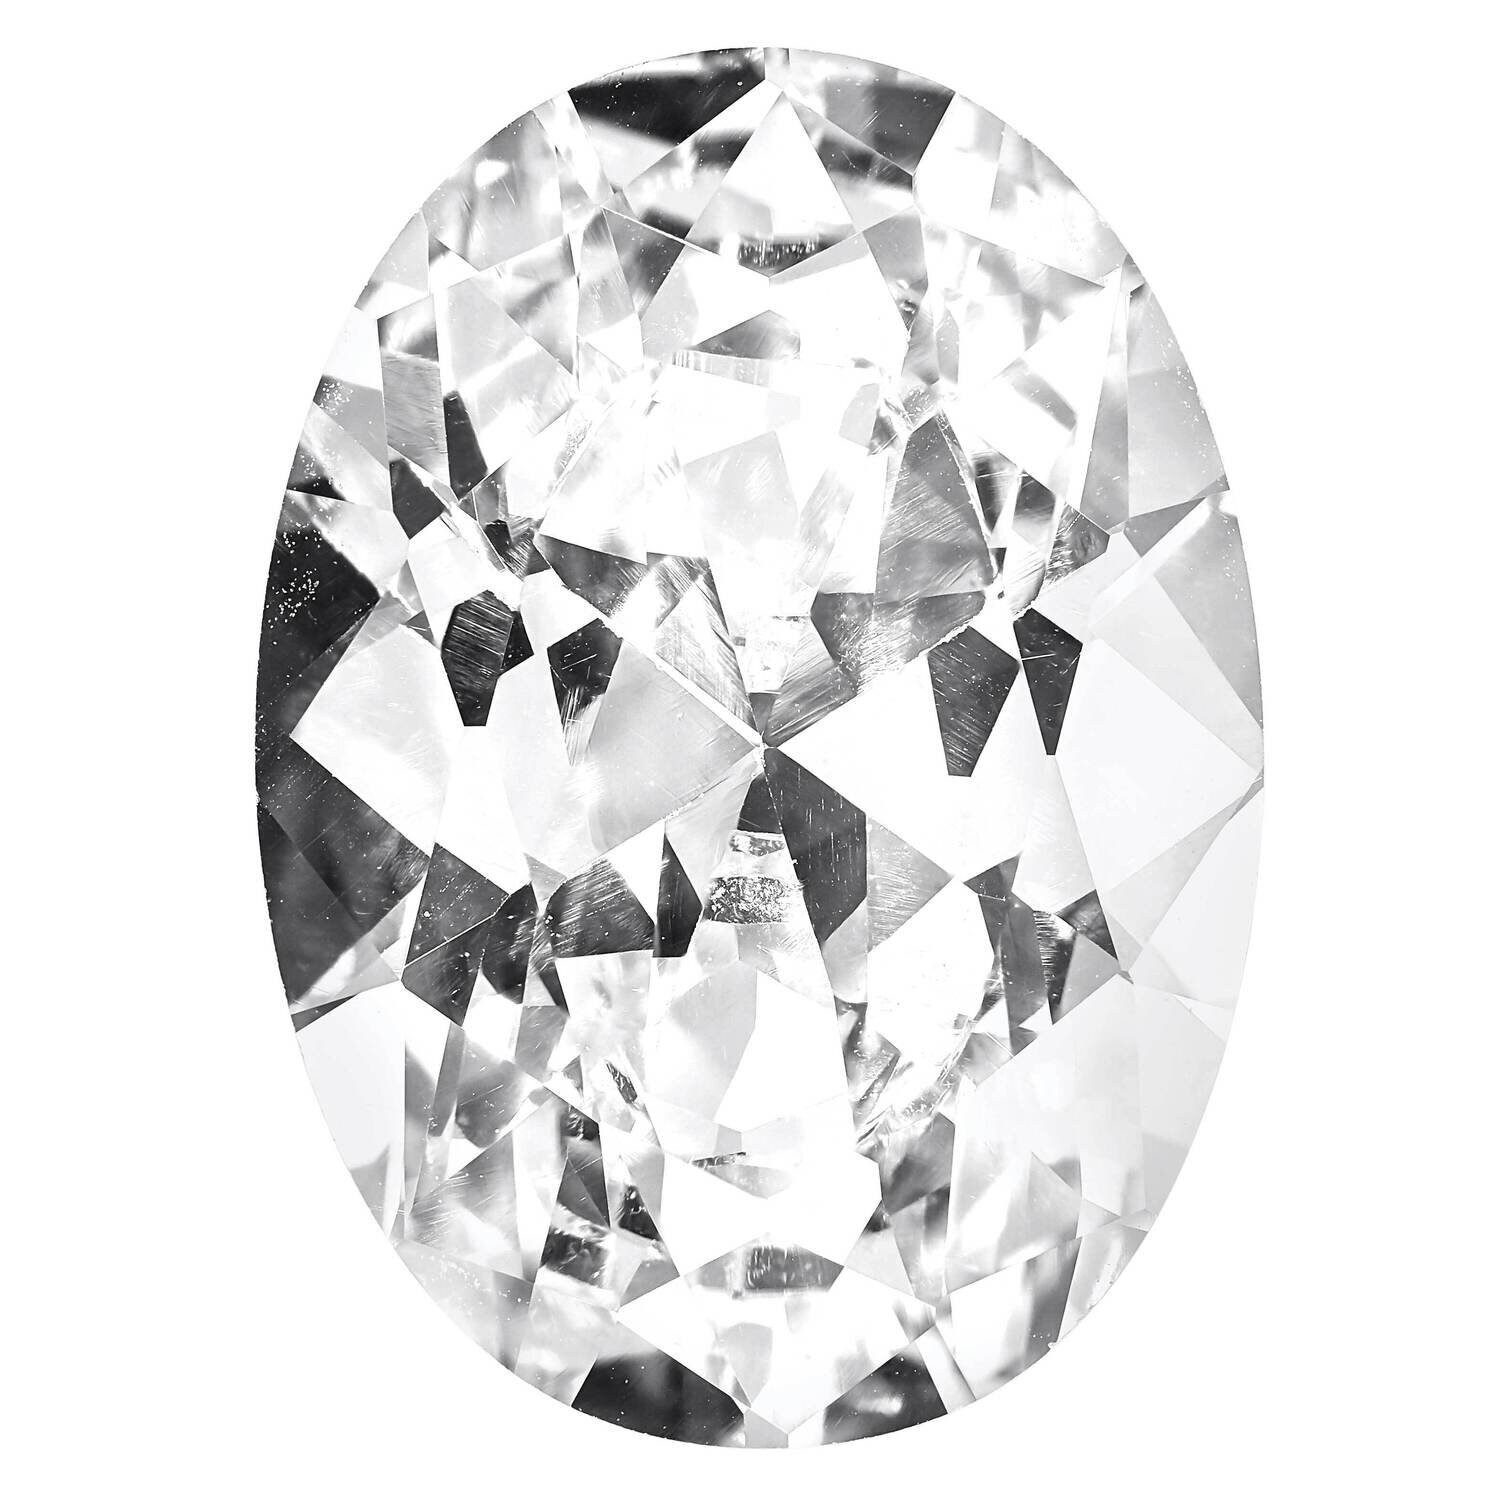 Cubic Zirconia White 5x3mm Oval A Quality CZ-0503-OVF-WH-A